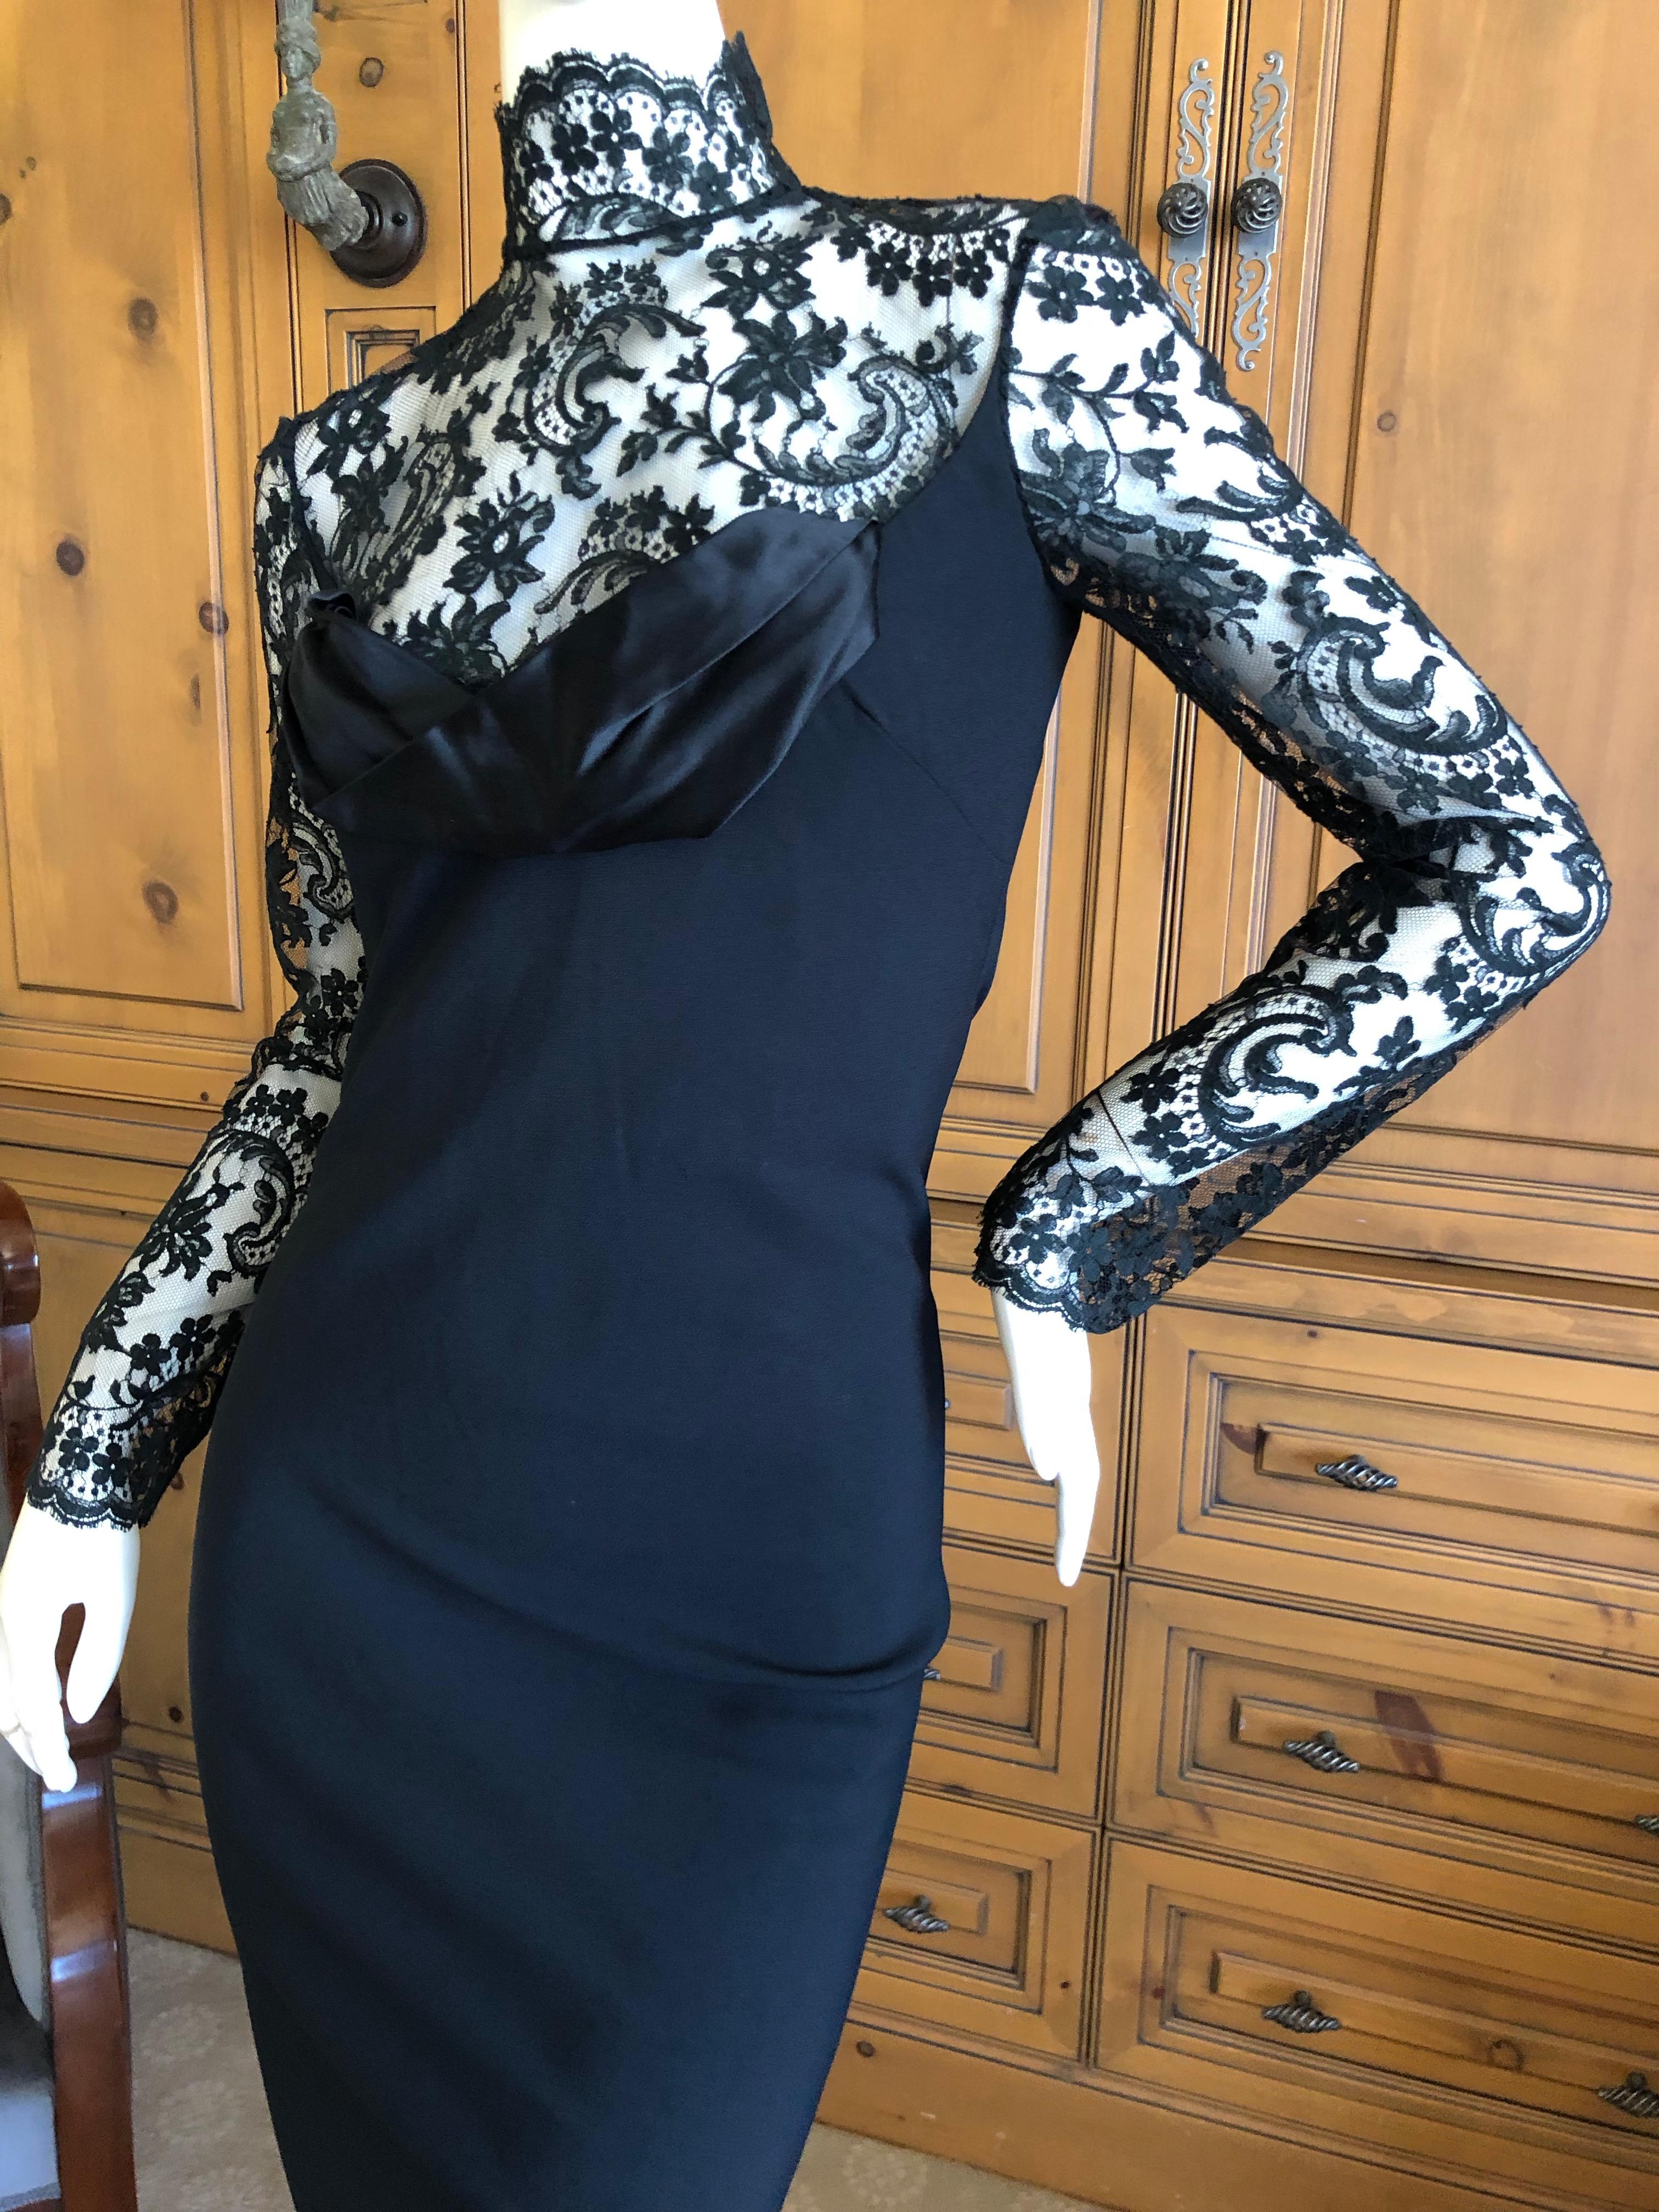 Women's Givenchy Haute Couture by John Galliano Black Lace Cocktail Dress For Sale